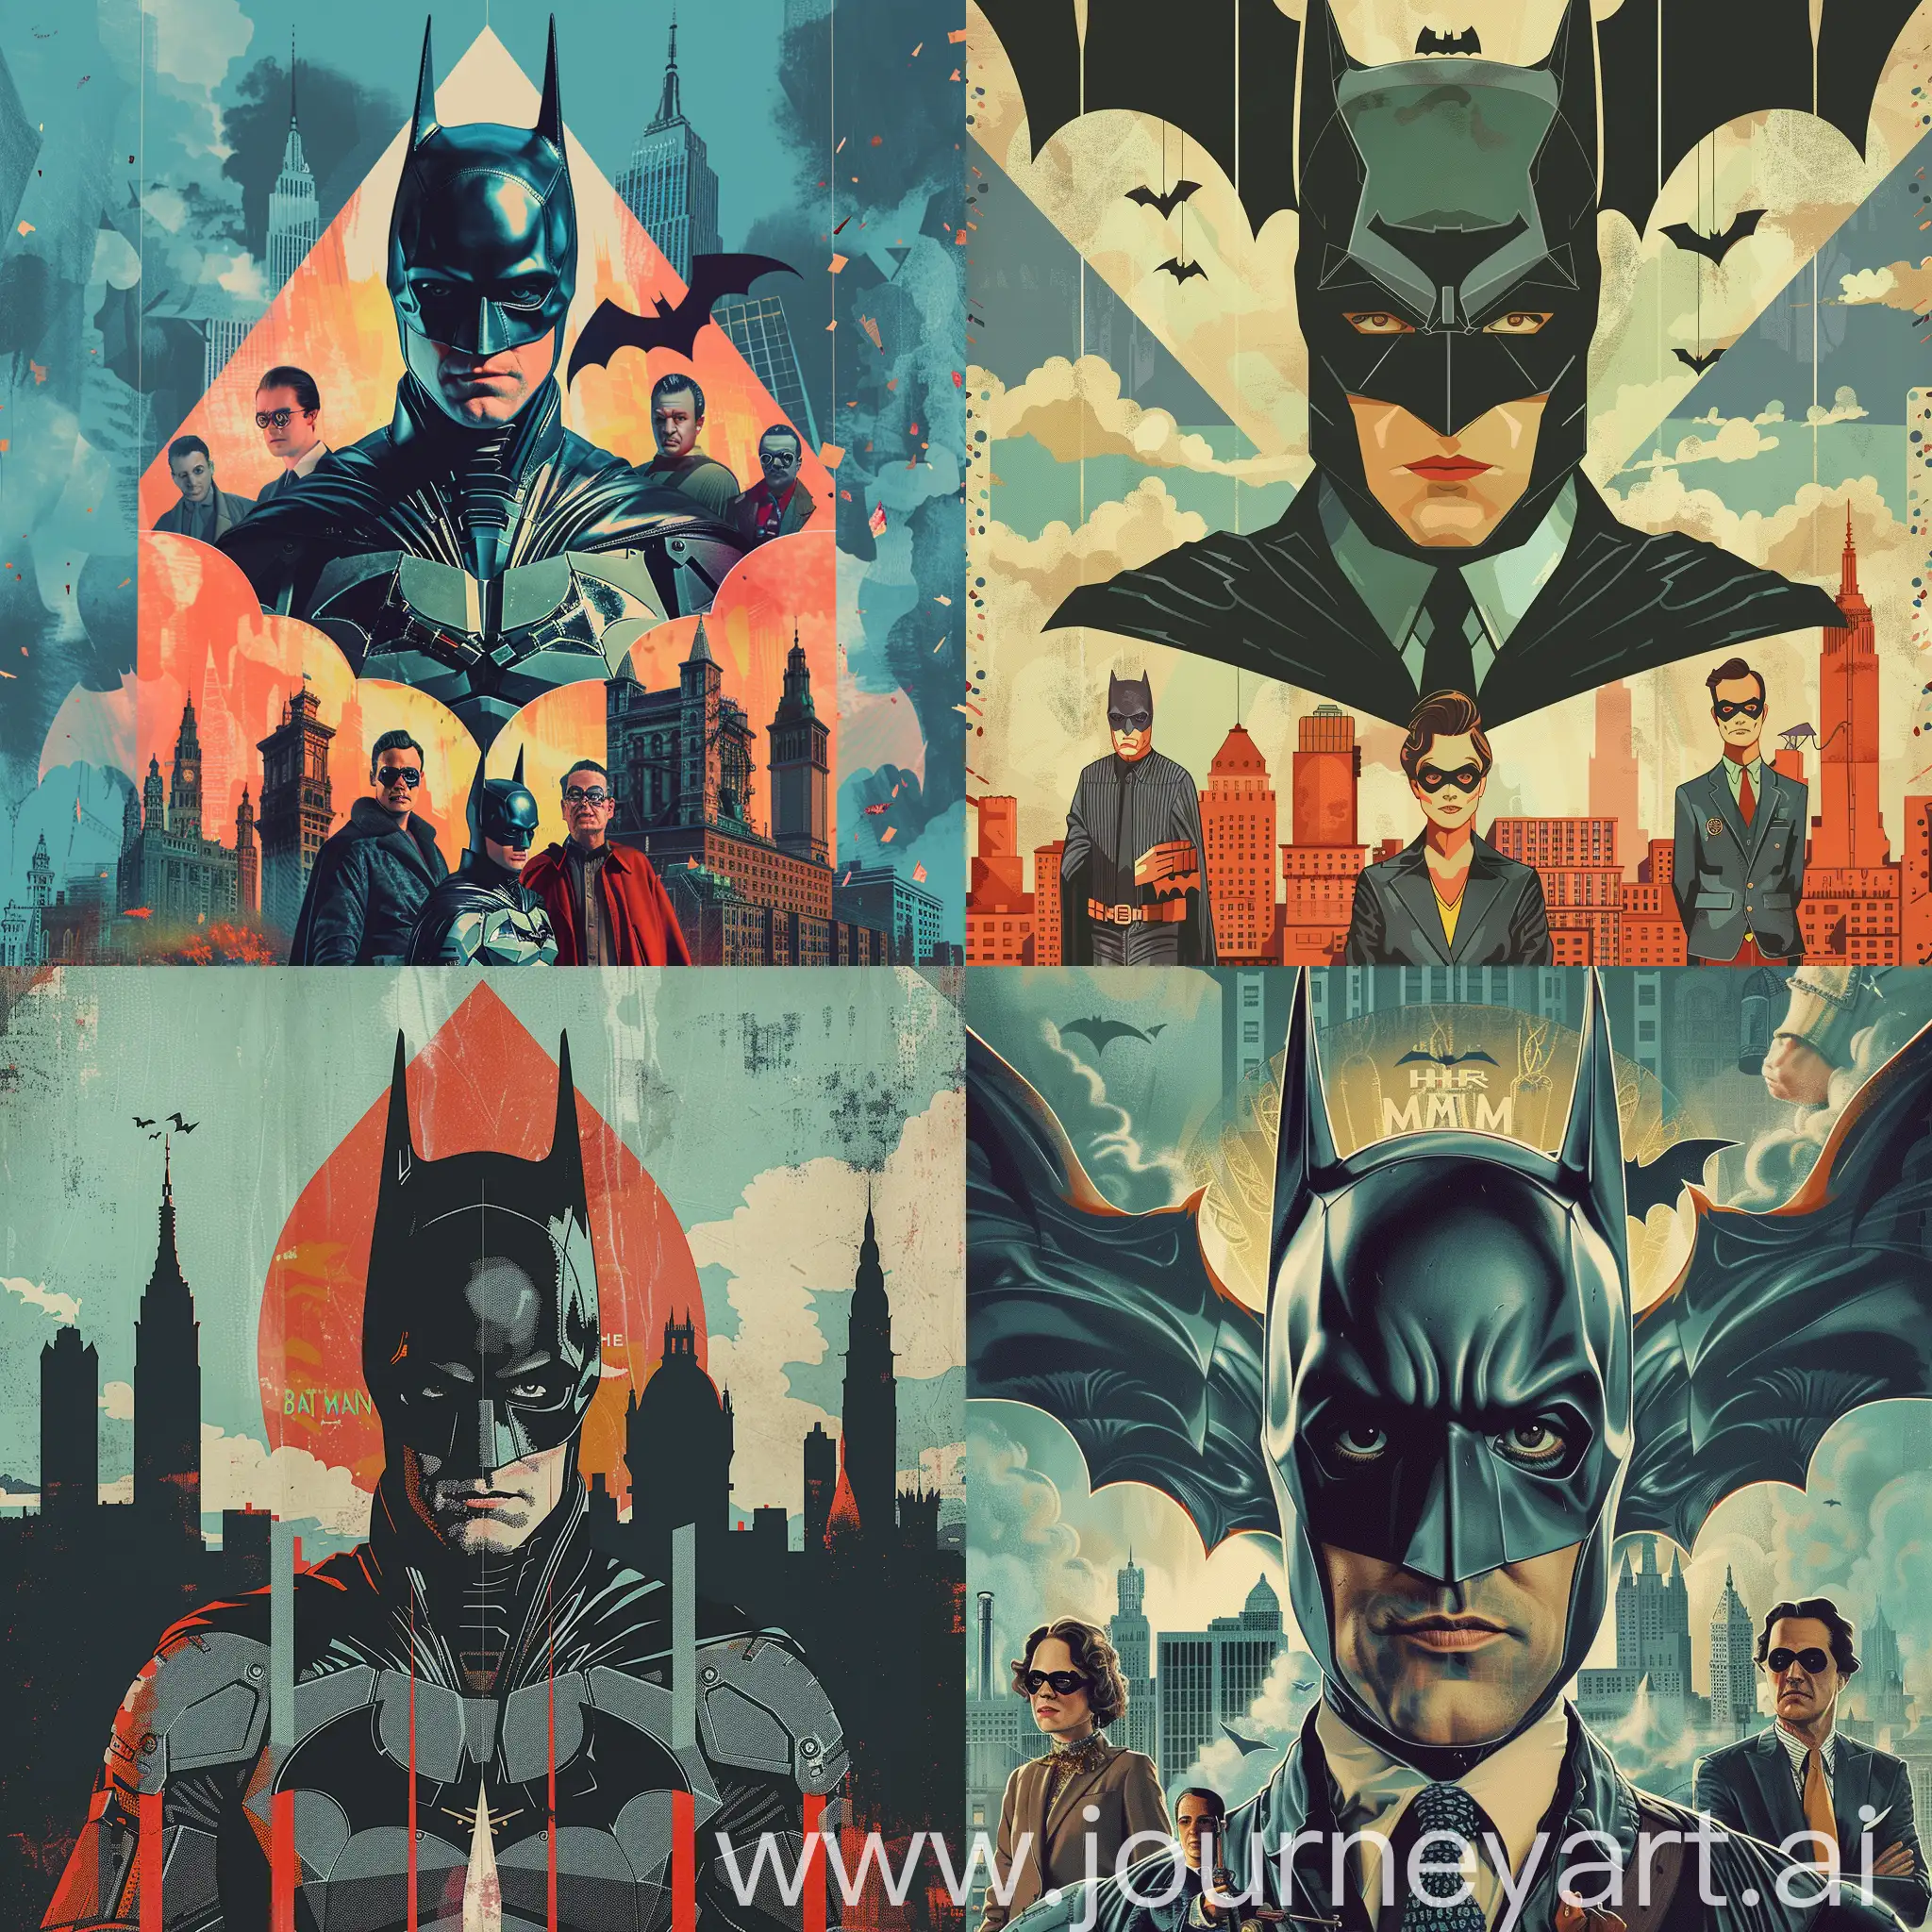 Create an artistic poster capturing the whimsical essence of Wes Anderson's interpretation of Batman in 'The Bat-Man'. Incorporate bold colors, symmetrical compositions, and quirky characters against a backdrop of Gotham's skyline. Highlight the idiosyncrasies of Anderson's style merged with the iconic imagery of the Dark Knight.